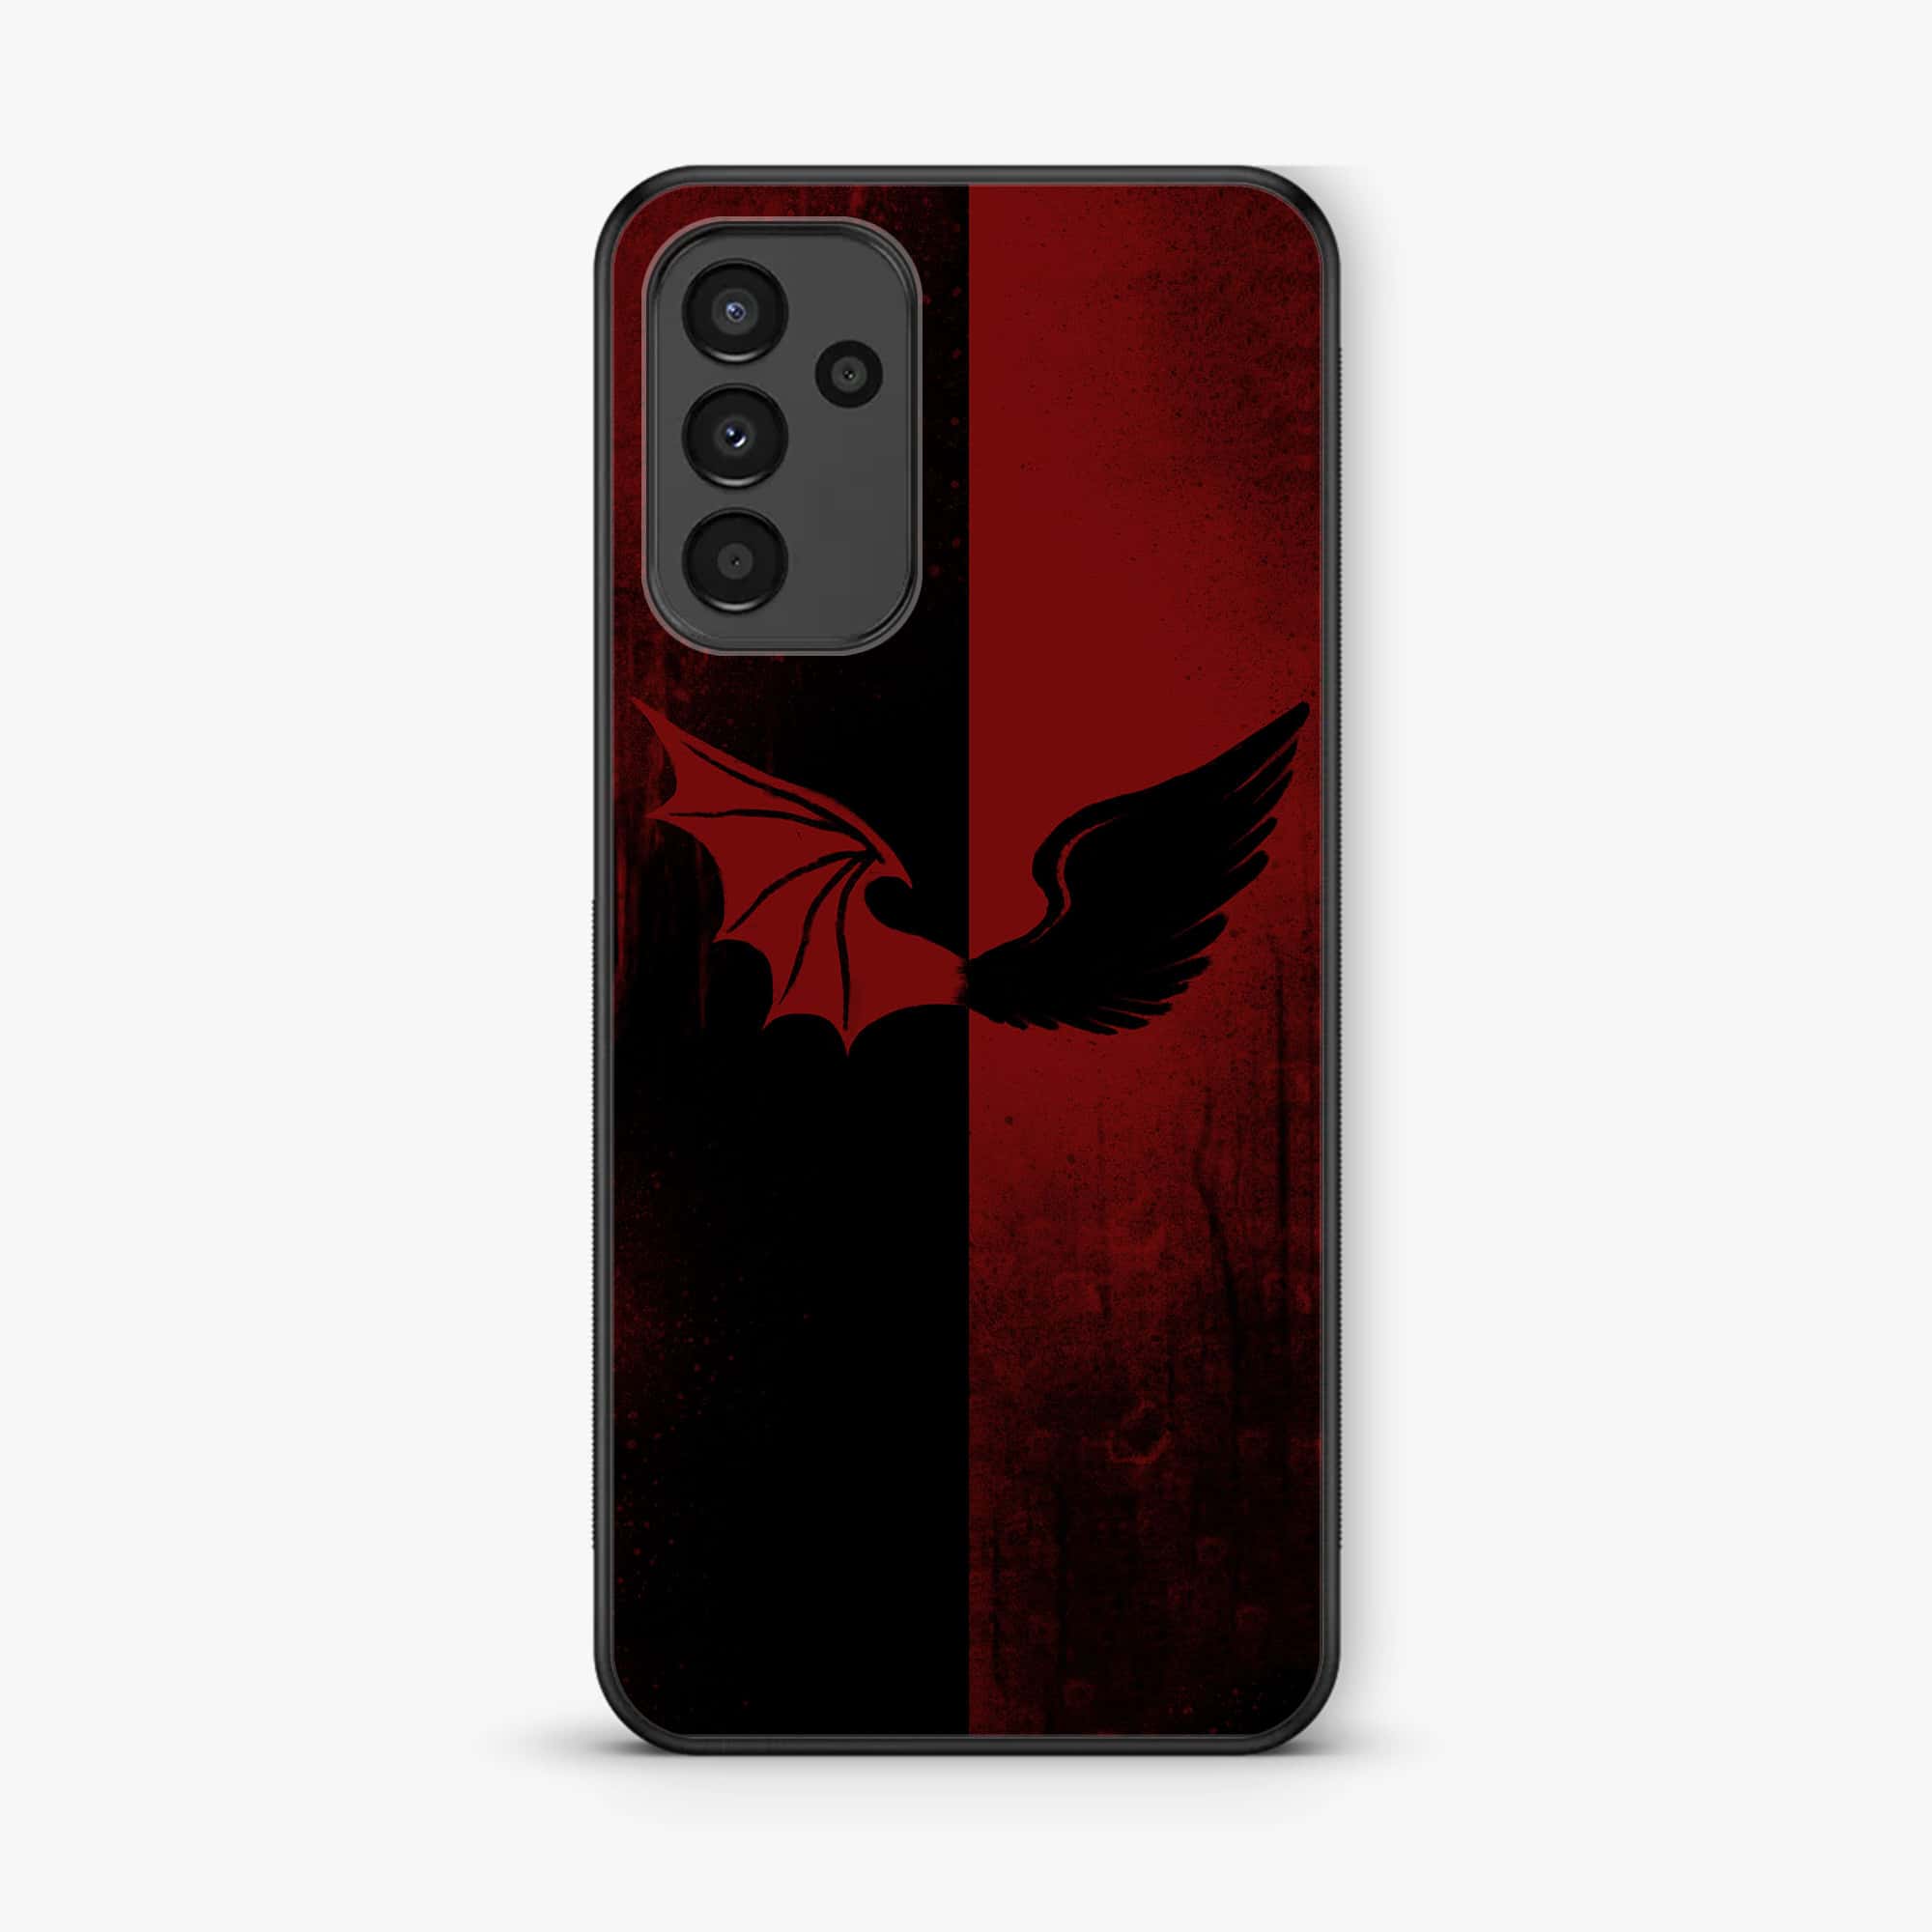 Samsung Galaxy A05s - Angel Wings 2.0 Series - Premium Printed Glass soft Bumper shock Proof Case